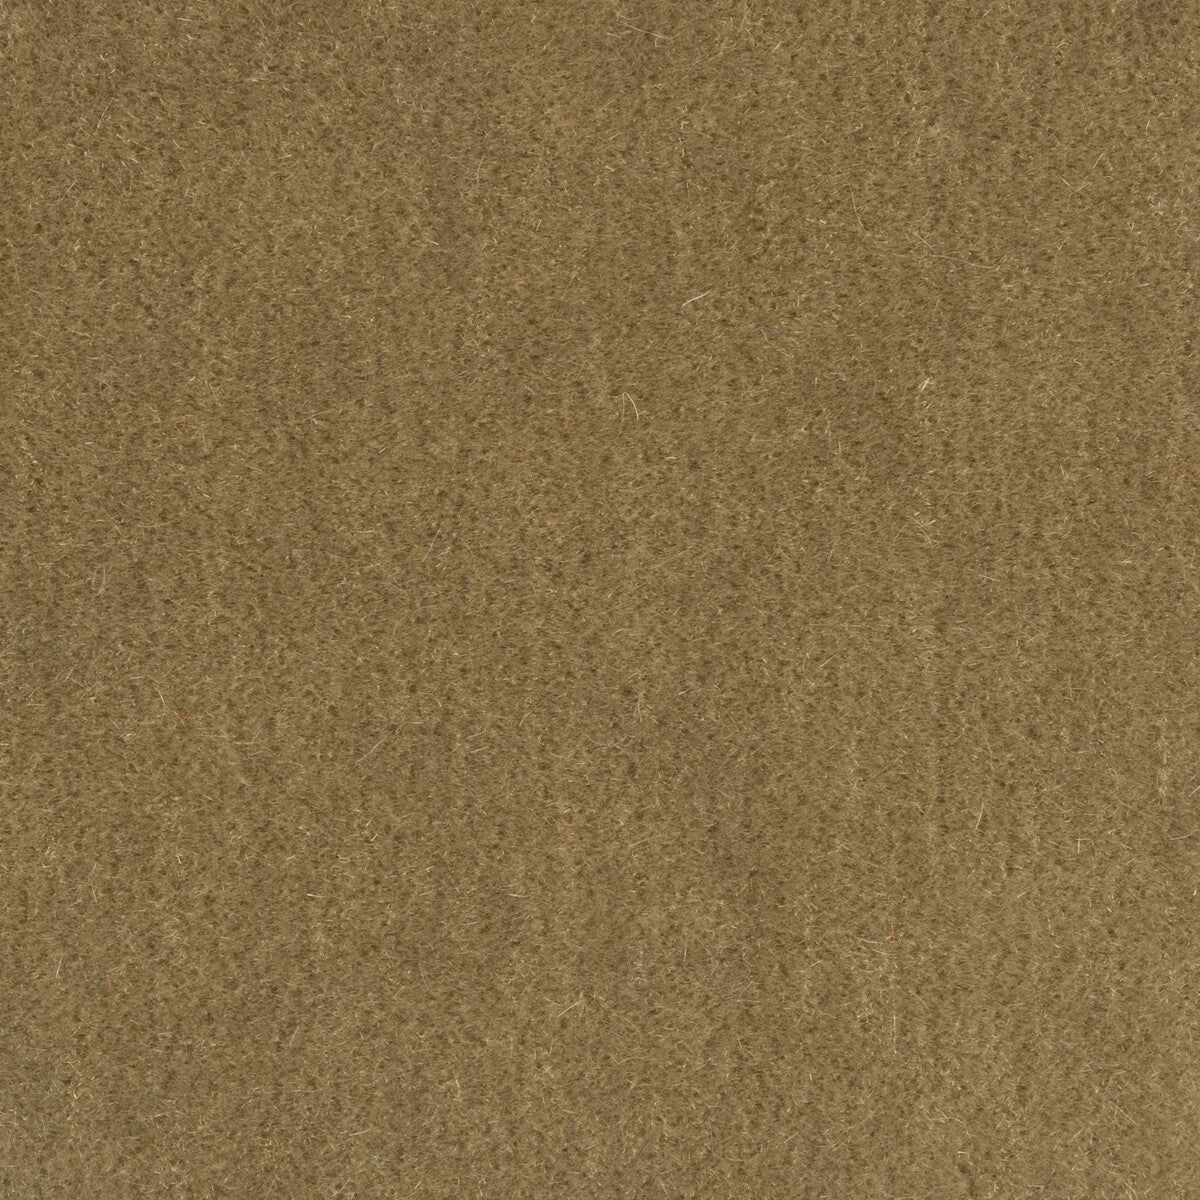 Bachelor Mohair fabric in birch color - pattern 8014101.106.0 - by Brunschwig &amp; Fils